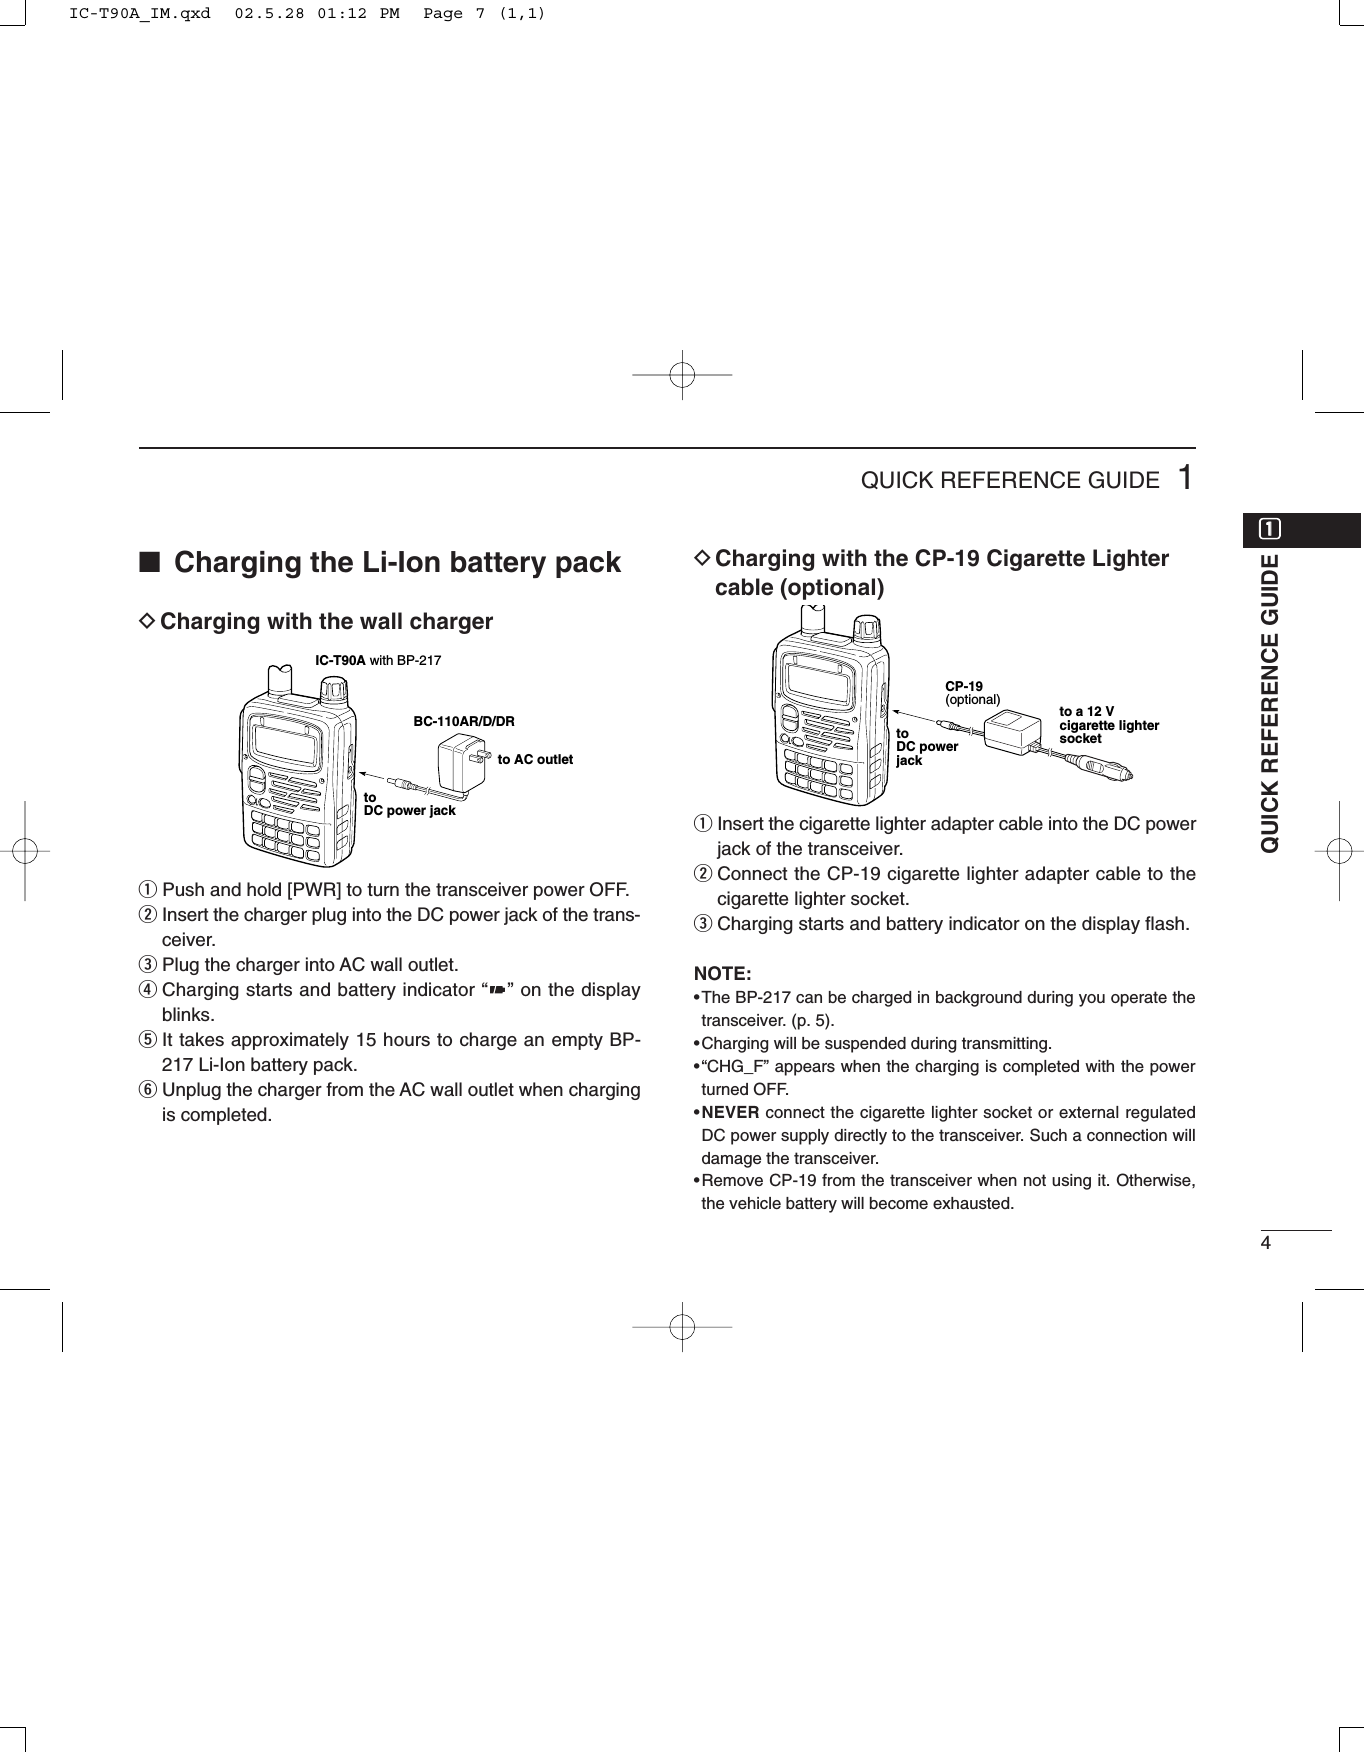 41QUICK REFERENCE GUIDE■Charging the Li-Ion battery packDCharging with the wall chargerqPush and hold [PWR] to turn the transceiver power OFF.wInsert the charger plug into the DC power jack of the trans-ceiver.ePlug the charger into AC wall outlet.rCharging starts and battery indicator “” on the displayblinks. tIt takes approximately 15 hours to charge an empty BP-217 Li-Ion battery pack.yUnplug the charger from the AC wall outlet when chargingis completed.DCharging with the CP-19 Cigarette Lightercable (optional)qInsert the cigarette lighter adapter cable into the DC powerjack of the transceiver.wConnect the CP-19 cigarette lighter adapter cable to thecigarette lighter socket.eCharging starts and battery indicator on the display ﬂash.NOTE:•The BP-217 can be charged in background during you operate thetransceiver. (p. 5).•Charging will be suspended during transmitting.•“CHG_F” appears when the charging is completed with the powerturned OFF.•NEVER connect the cigarette lighter socket or external regulatedDC power supply directly to the transceiver. Such a connection willdamage the transceiver.•Remove CP-19 from the transceiver when not using it. Otherwise,the vehicle battery will become exhausted.IC-T90A with BP-217BC-110AR/D/DRtoDC power jackto AC outletCP-19 (optional)toDC powerjackto a 12 V cigarette lightersocketQUICK REFERENCE GUIDEqqIC-T90A_IM.qxd  02.5.28 01:12 PM  Page 7 (1,1)